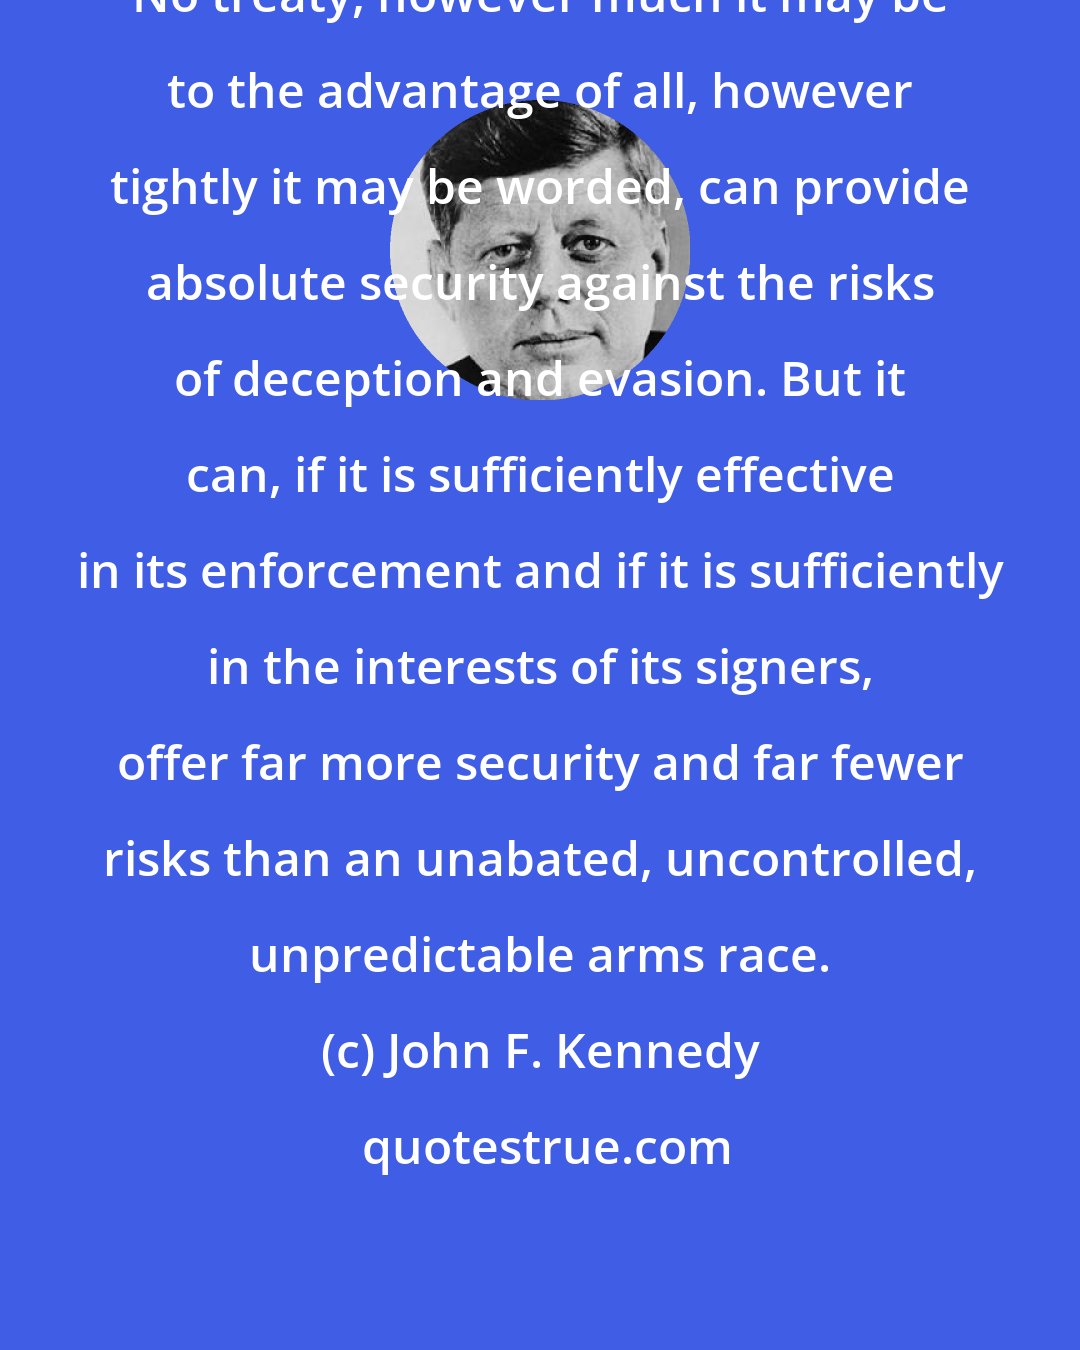 John F. Kennedy: No treaty, however much it may be to the advantage of all, however tightly it may be worded, can provide absolute security against the risks of deception and evasion. But it can, if it is sufficiently effective in its enforcement and if it is sufficiently in the interests of its signers, offer far more security and far fewer risks than an unabated, uncontrolled, unpredictable arms race.